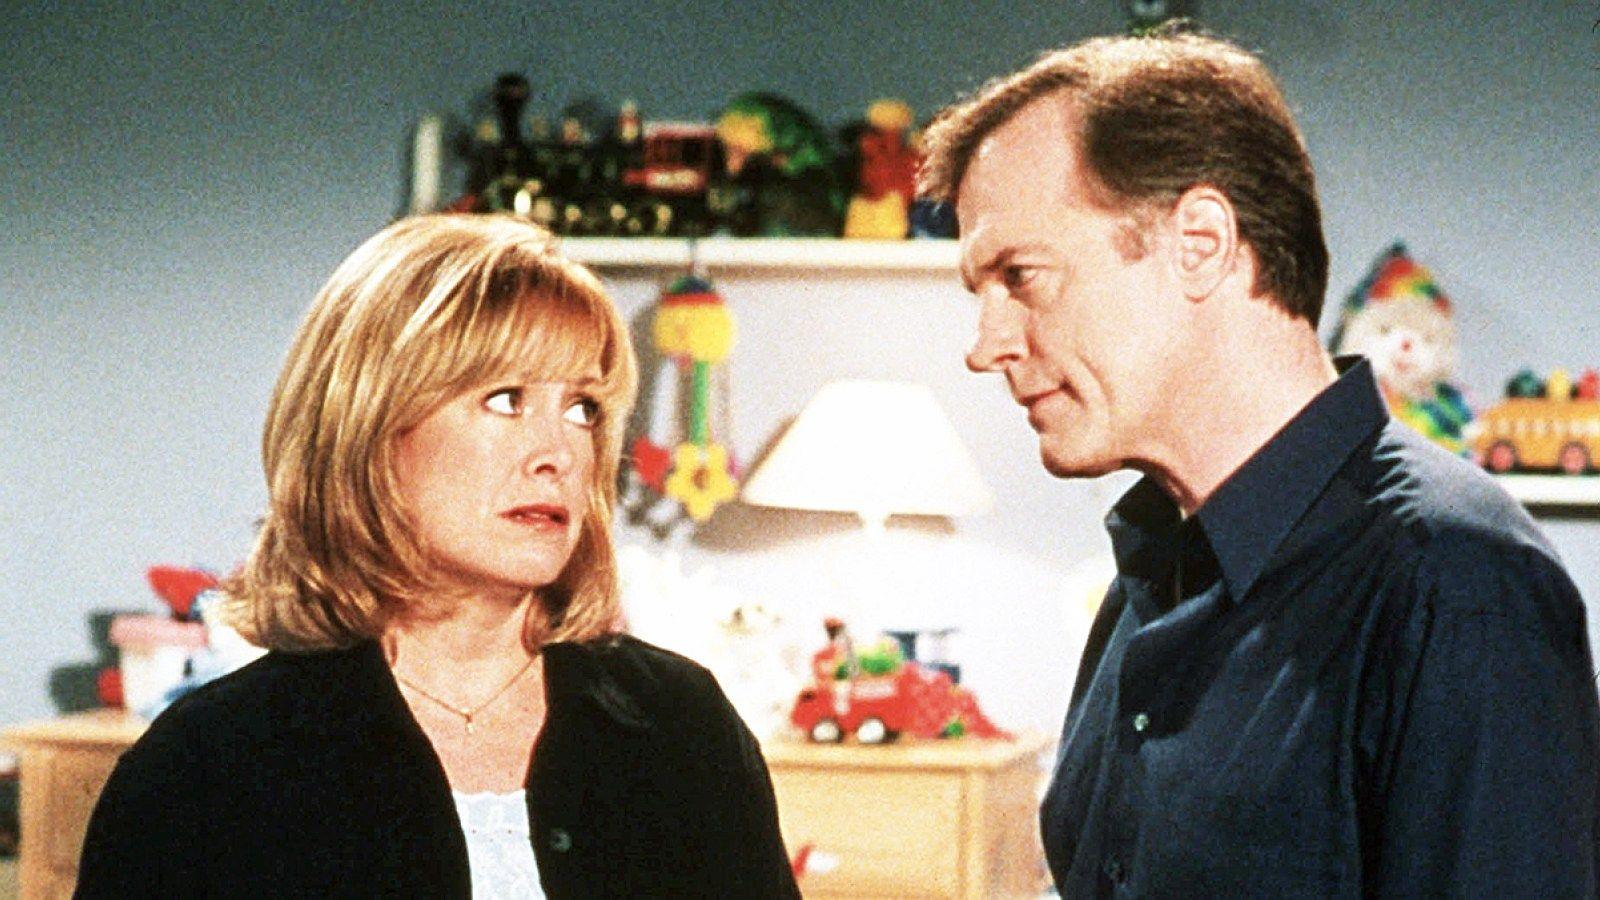 Catherine Hicks: I'll Do '7th Heaven' Reunion If Stephen Collins